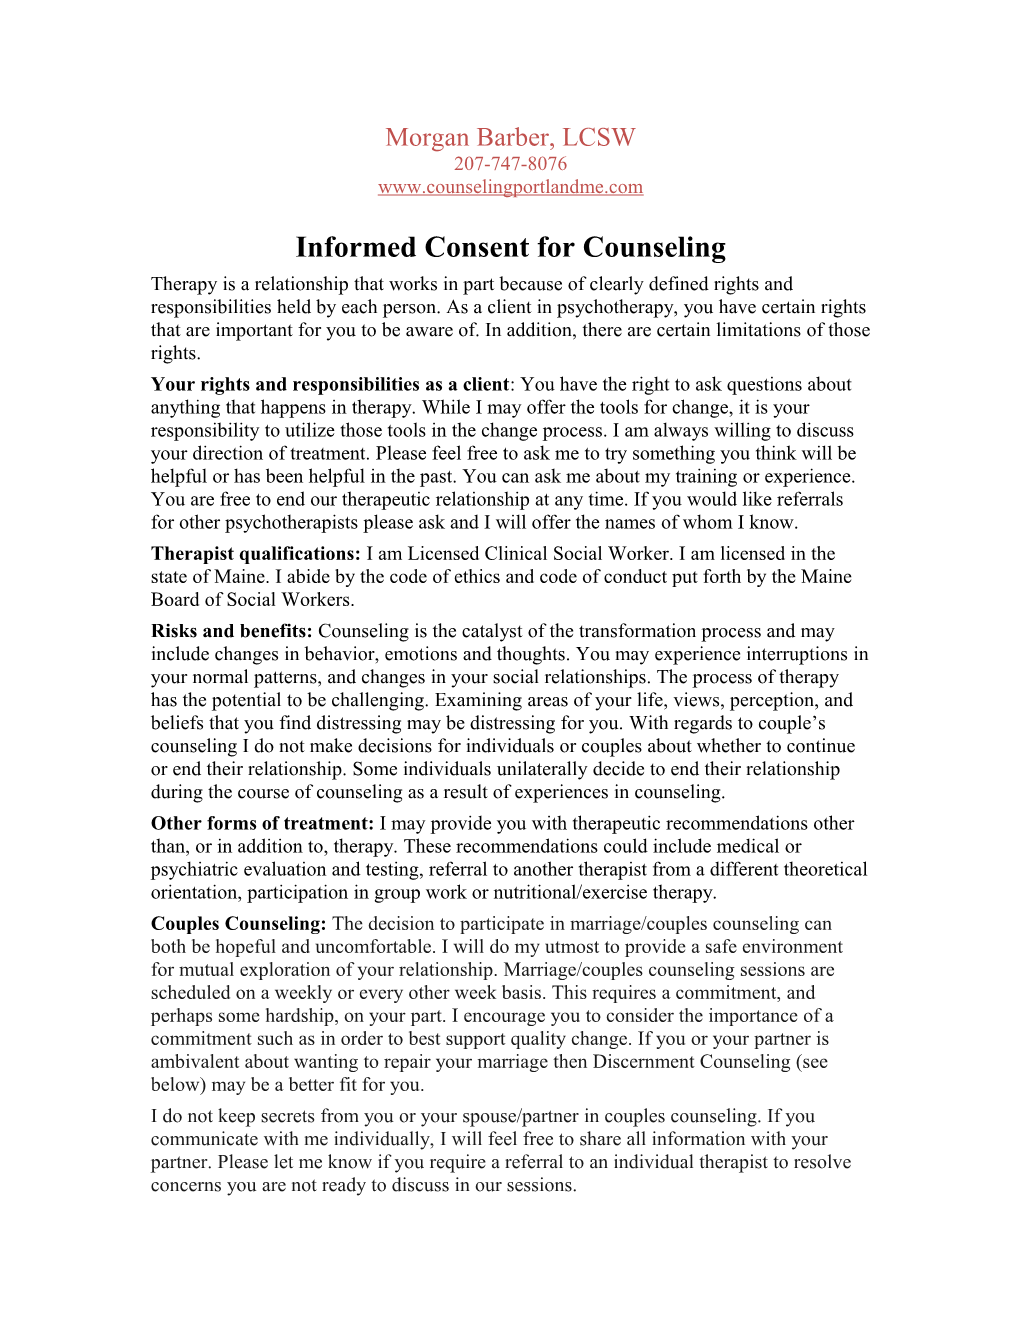 Informed Consent for Counseling